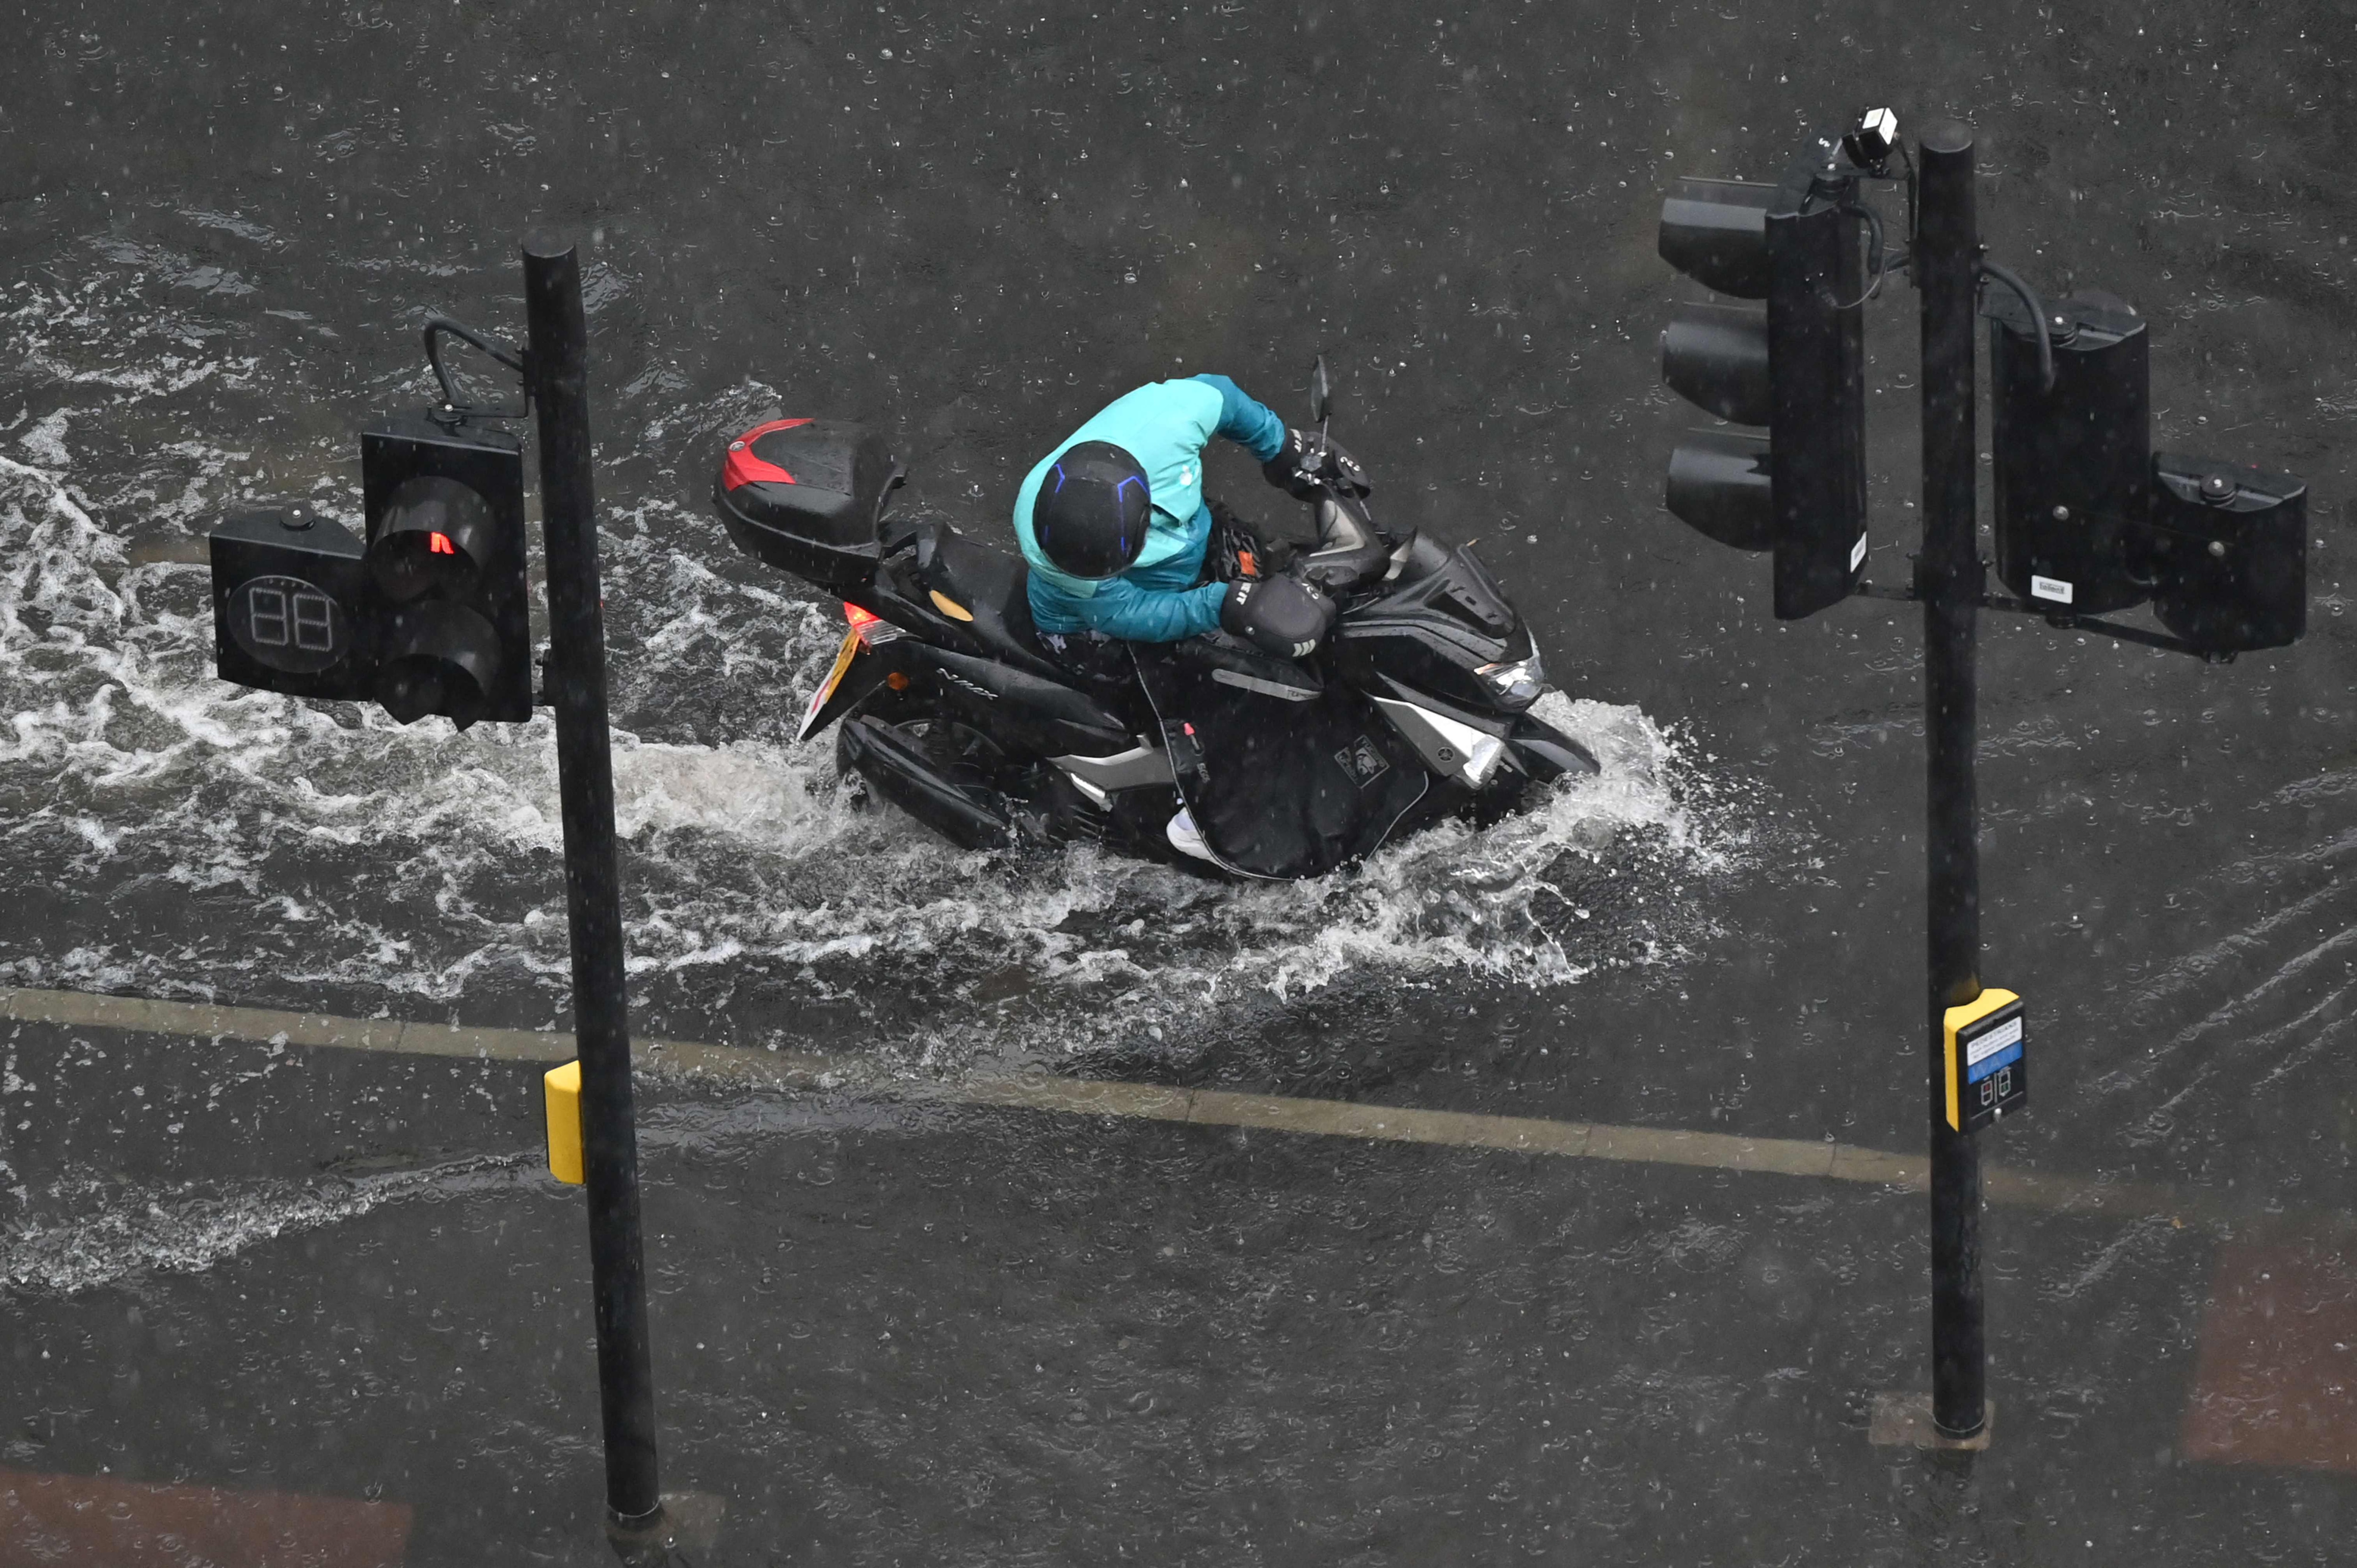 A motorcyclist tries to ride through deep water on a flooded road in The Nine Elms district of London.